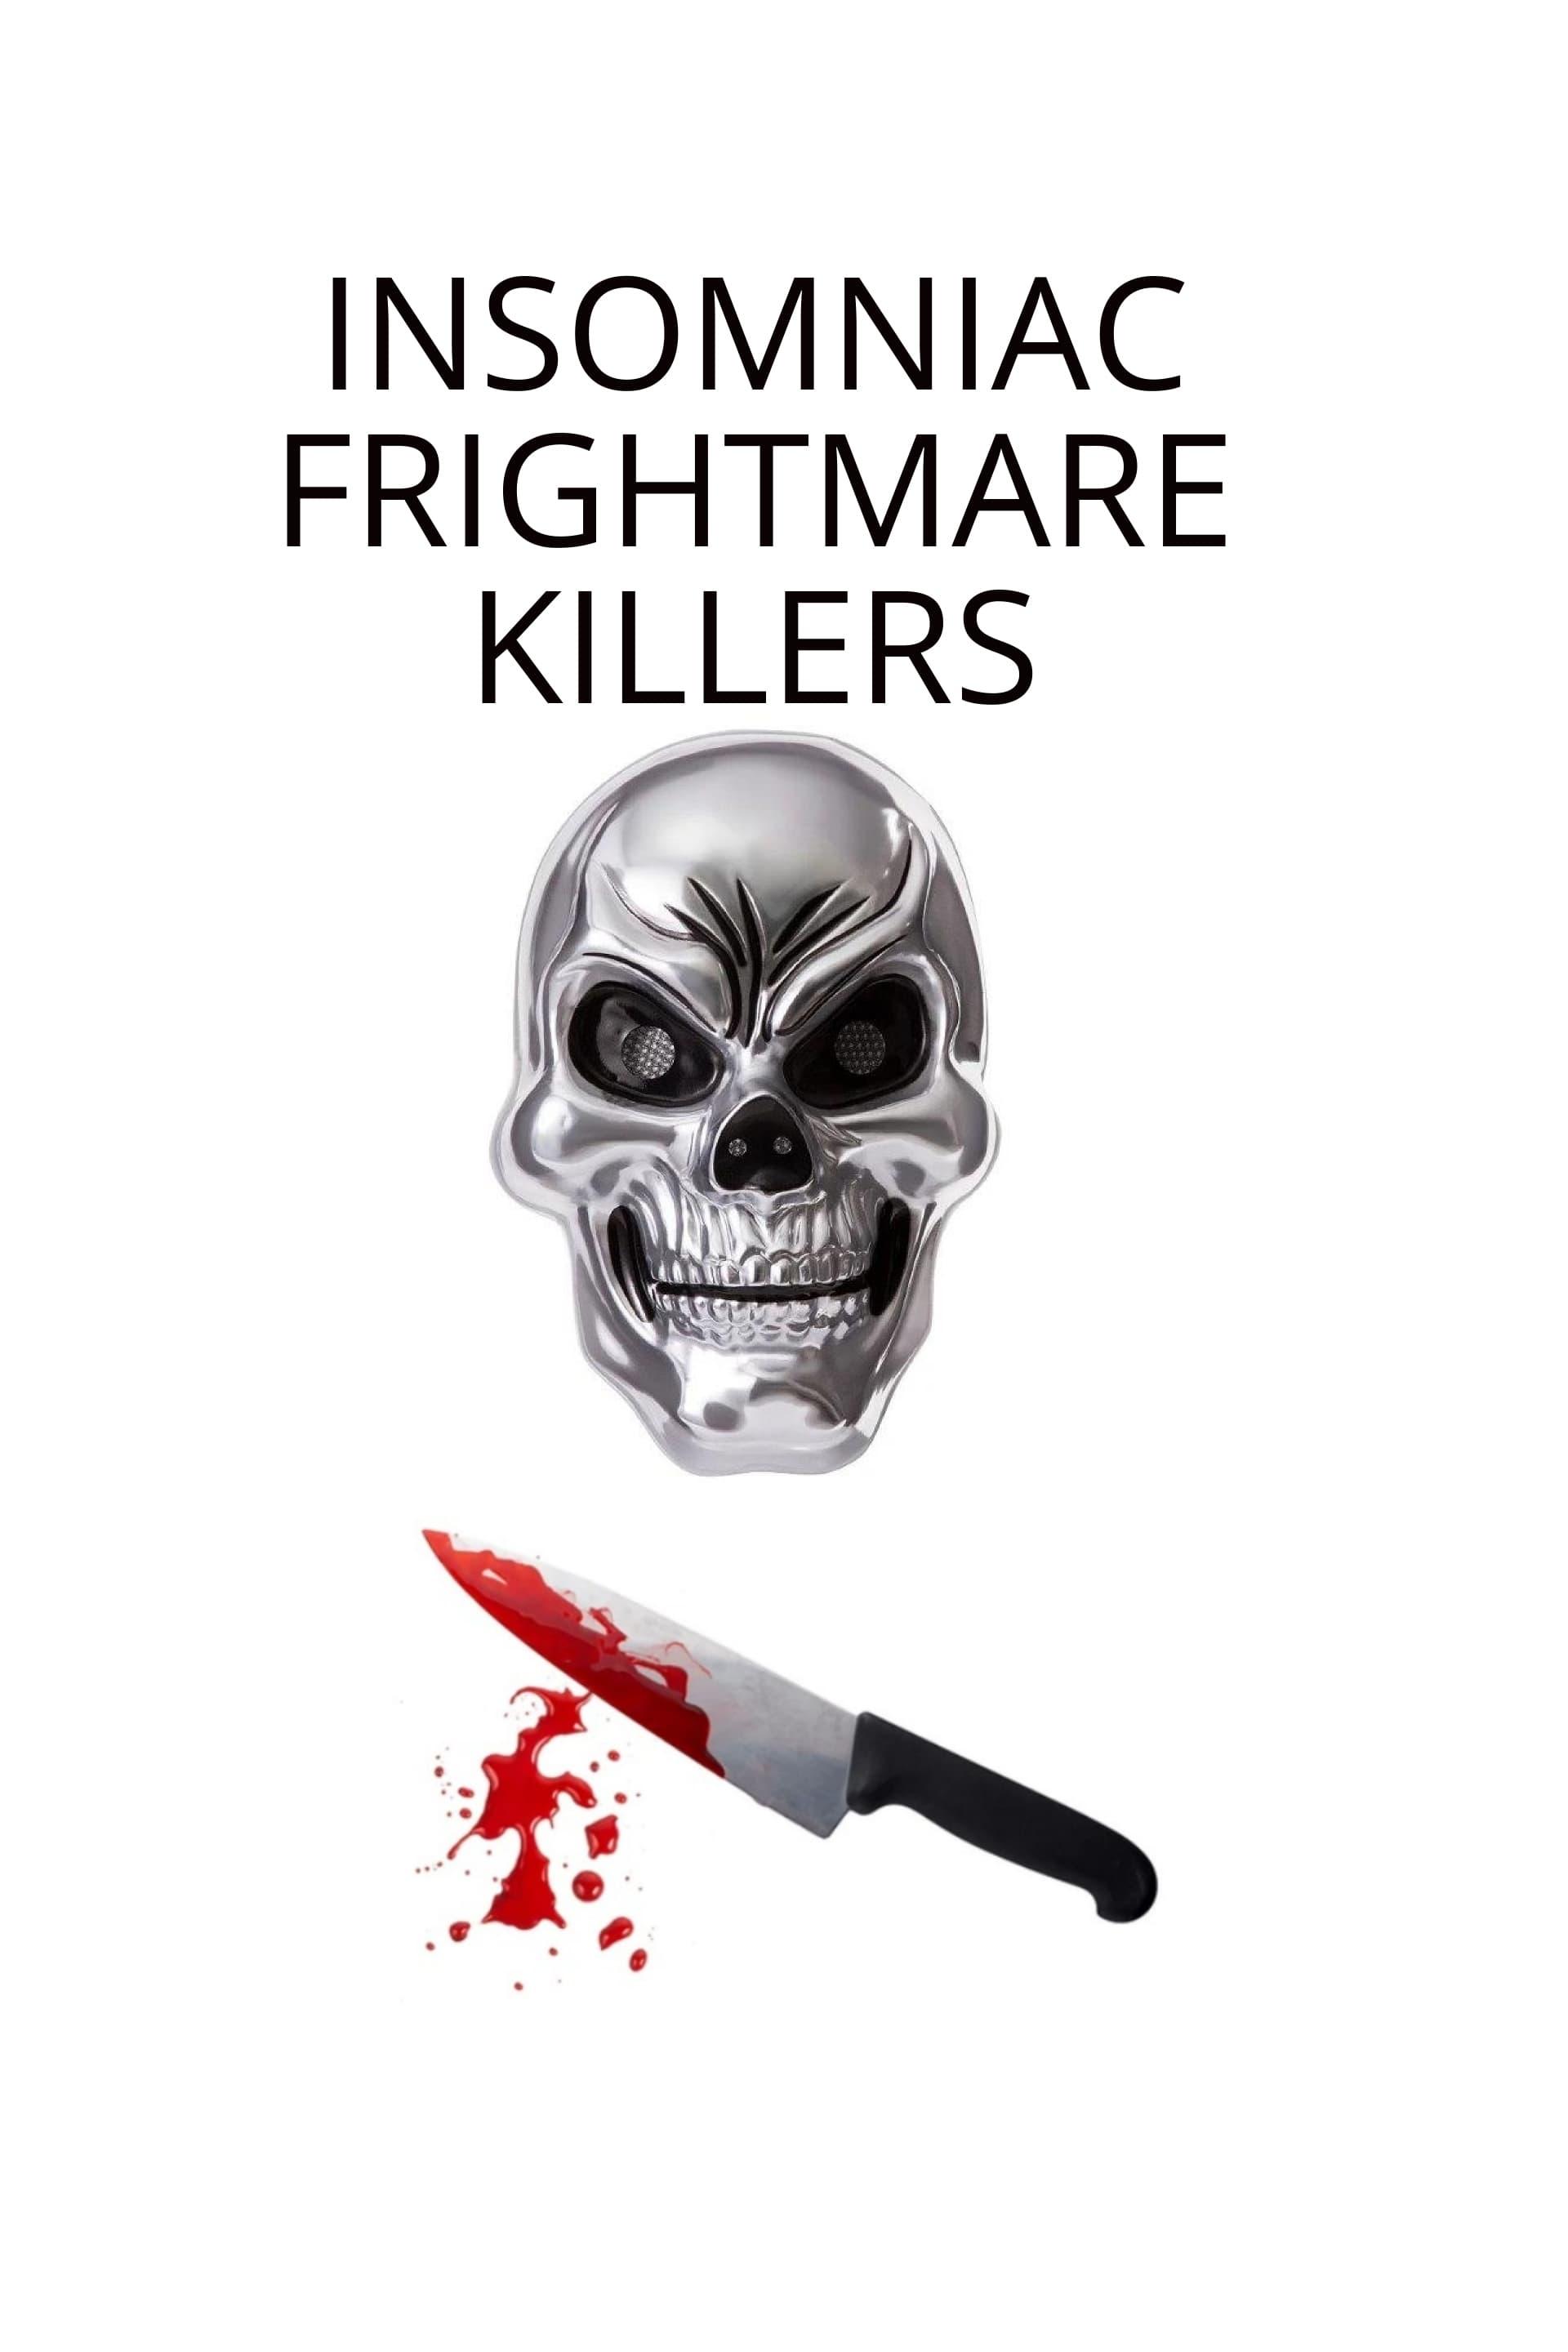 Insomniac Frightmare Killers poster